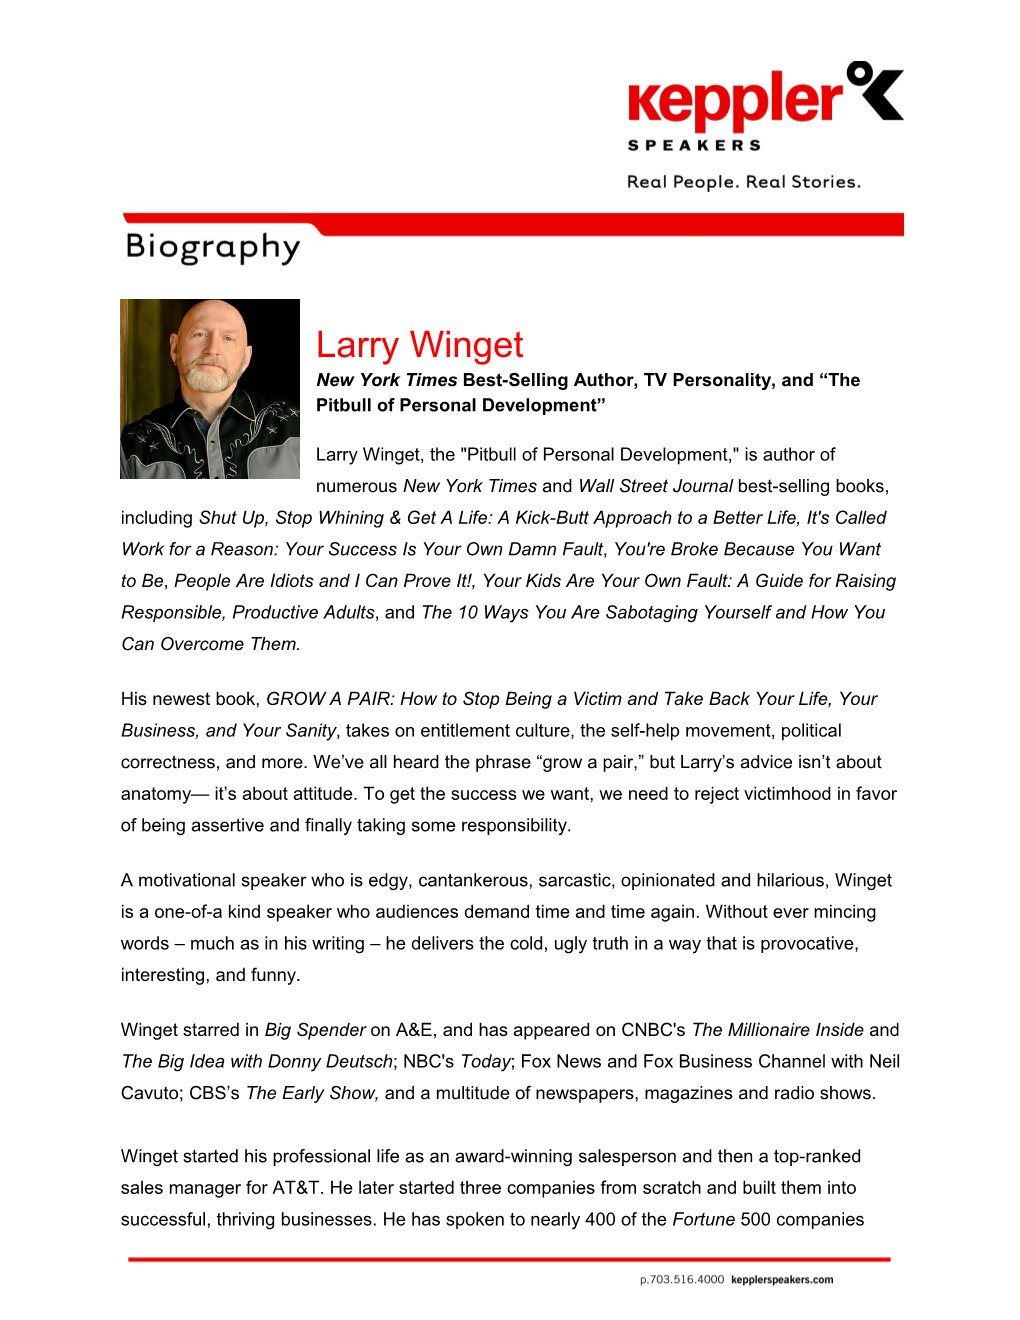 Larry Winget New York Times Best-Selling Author, Tvpersonality,And the Pitbull of Personal